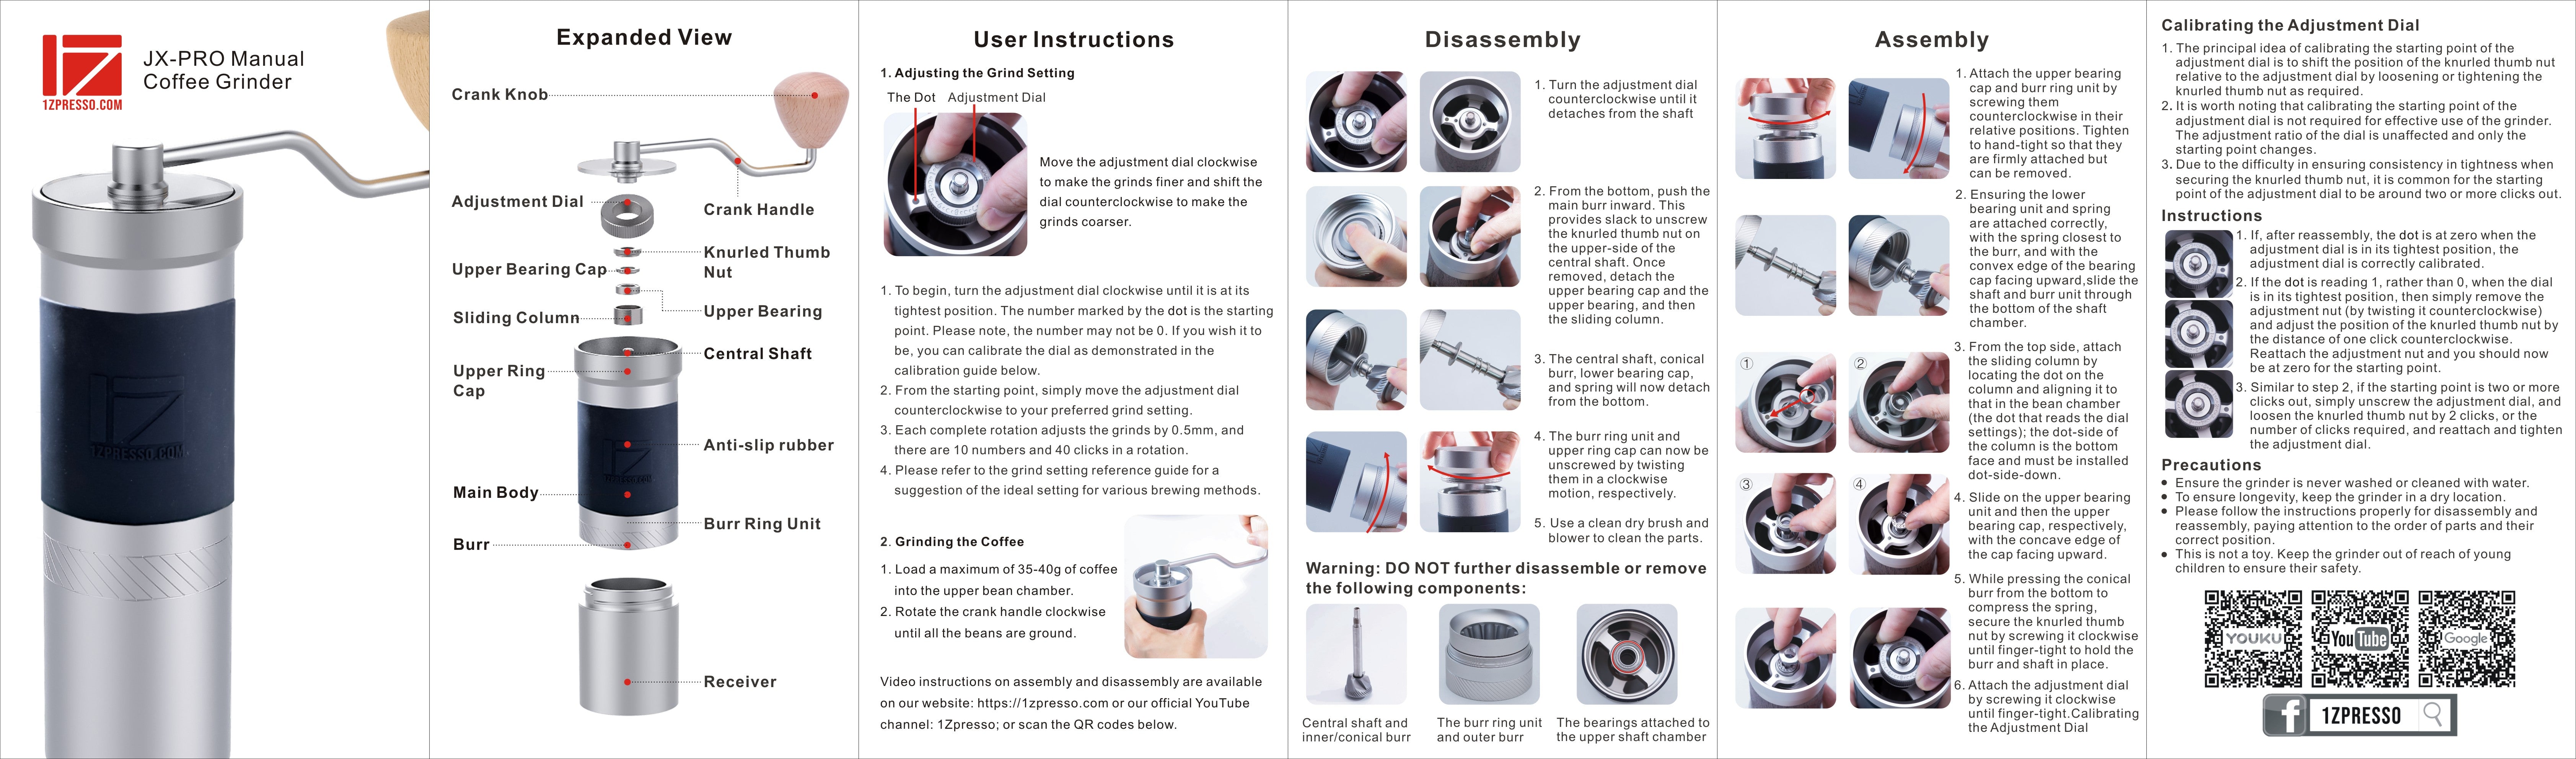 JX Pro hand grinder. Manual Grinder cleaning instructions. Manual describing how to clean your grinder